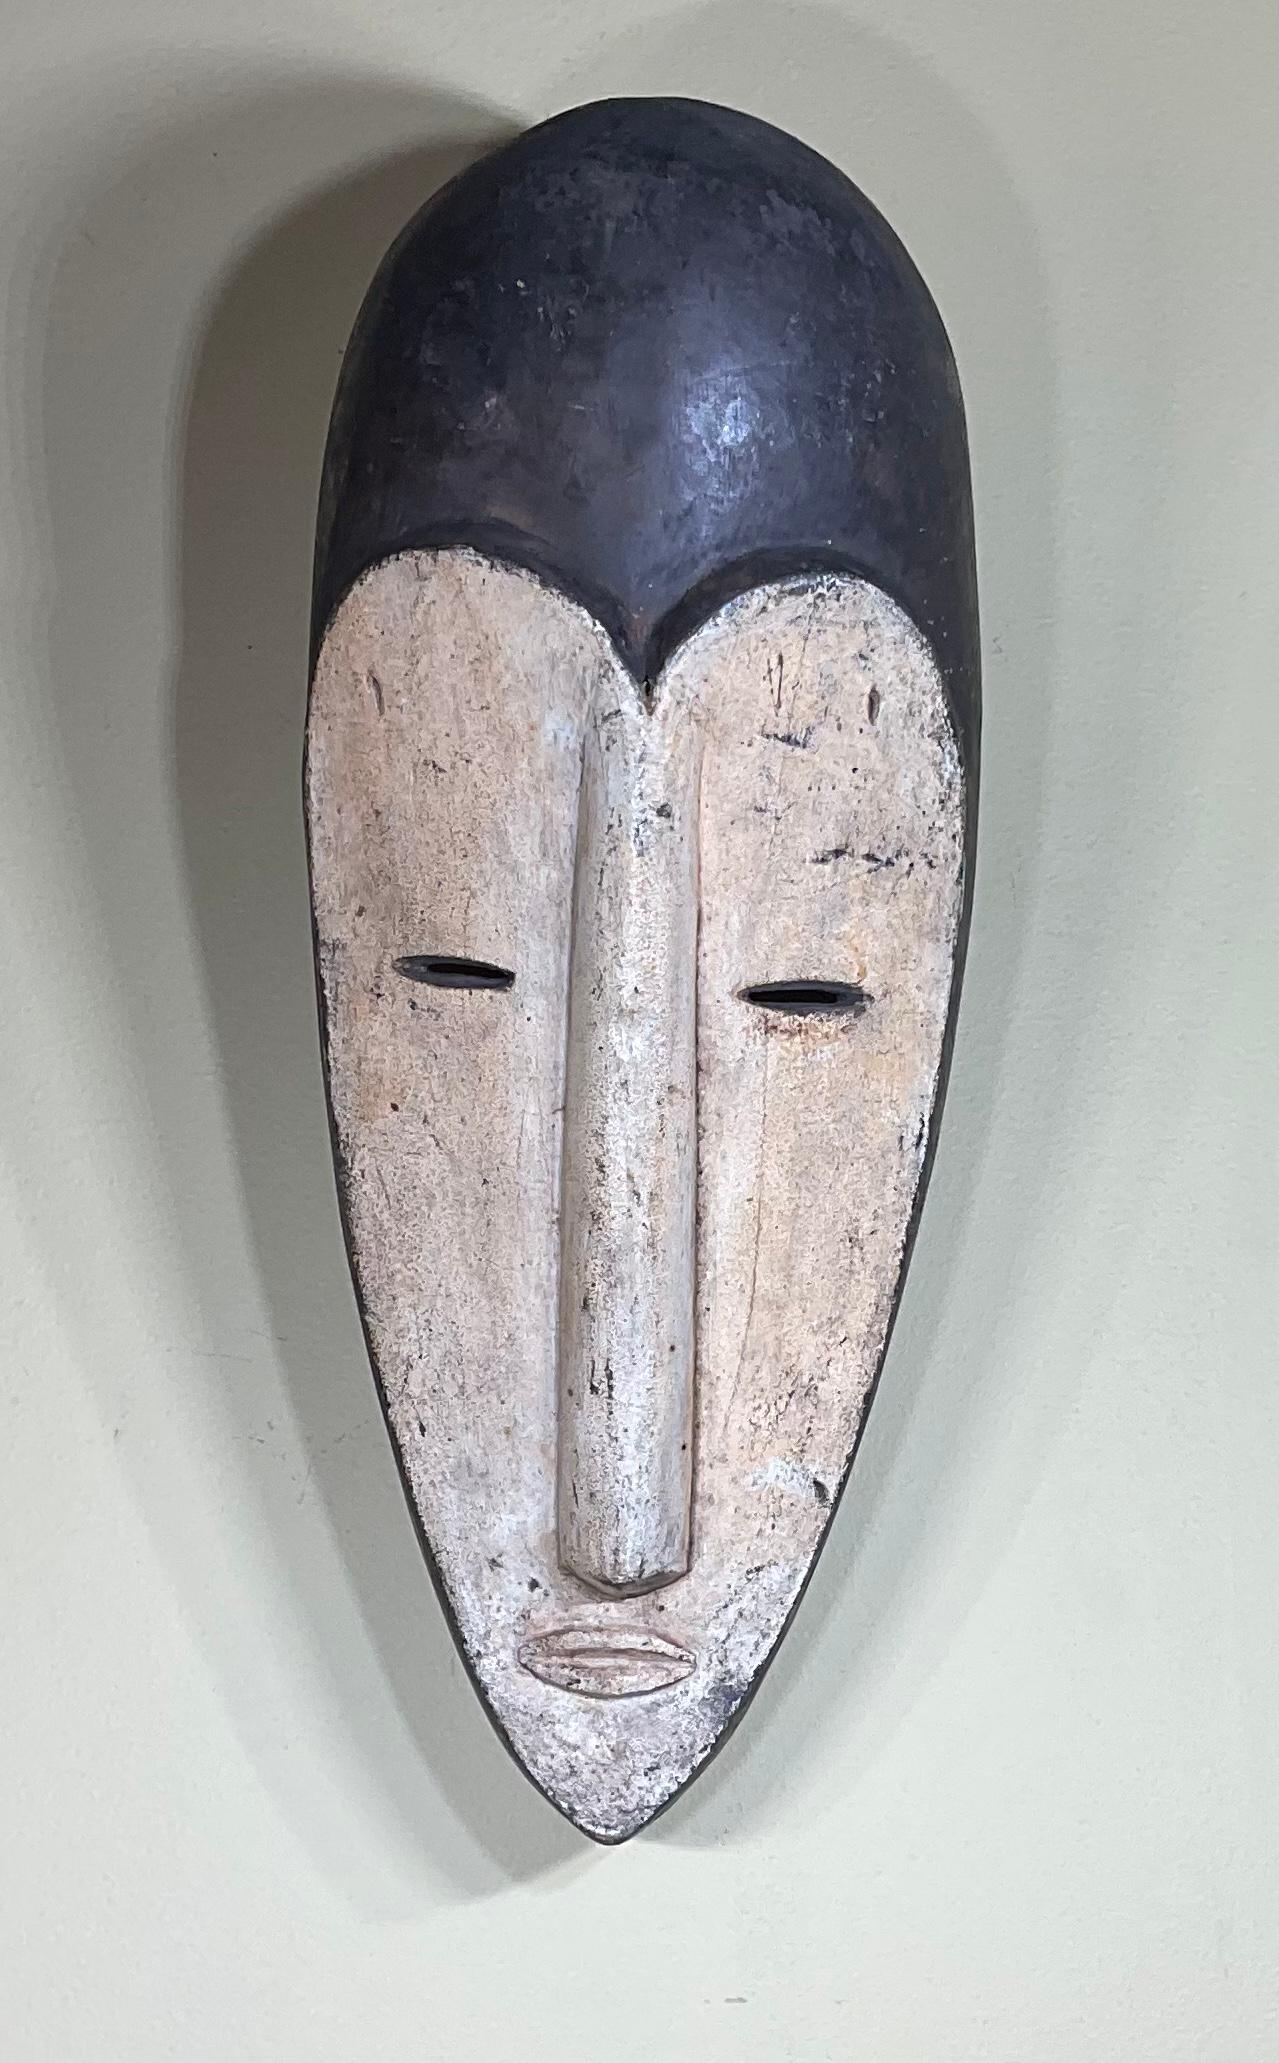 Exceptional hand carved wood mask hand painted, made of single piece of wood and was made for decorative purpose. Very intriguing and mysterious face.
The mask in mounted on custom made lucite base .
Size without base is: 7” wide x 7”.5 deep x 19”